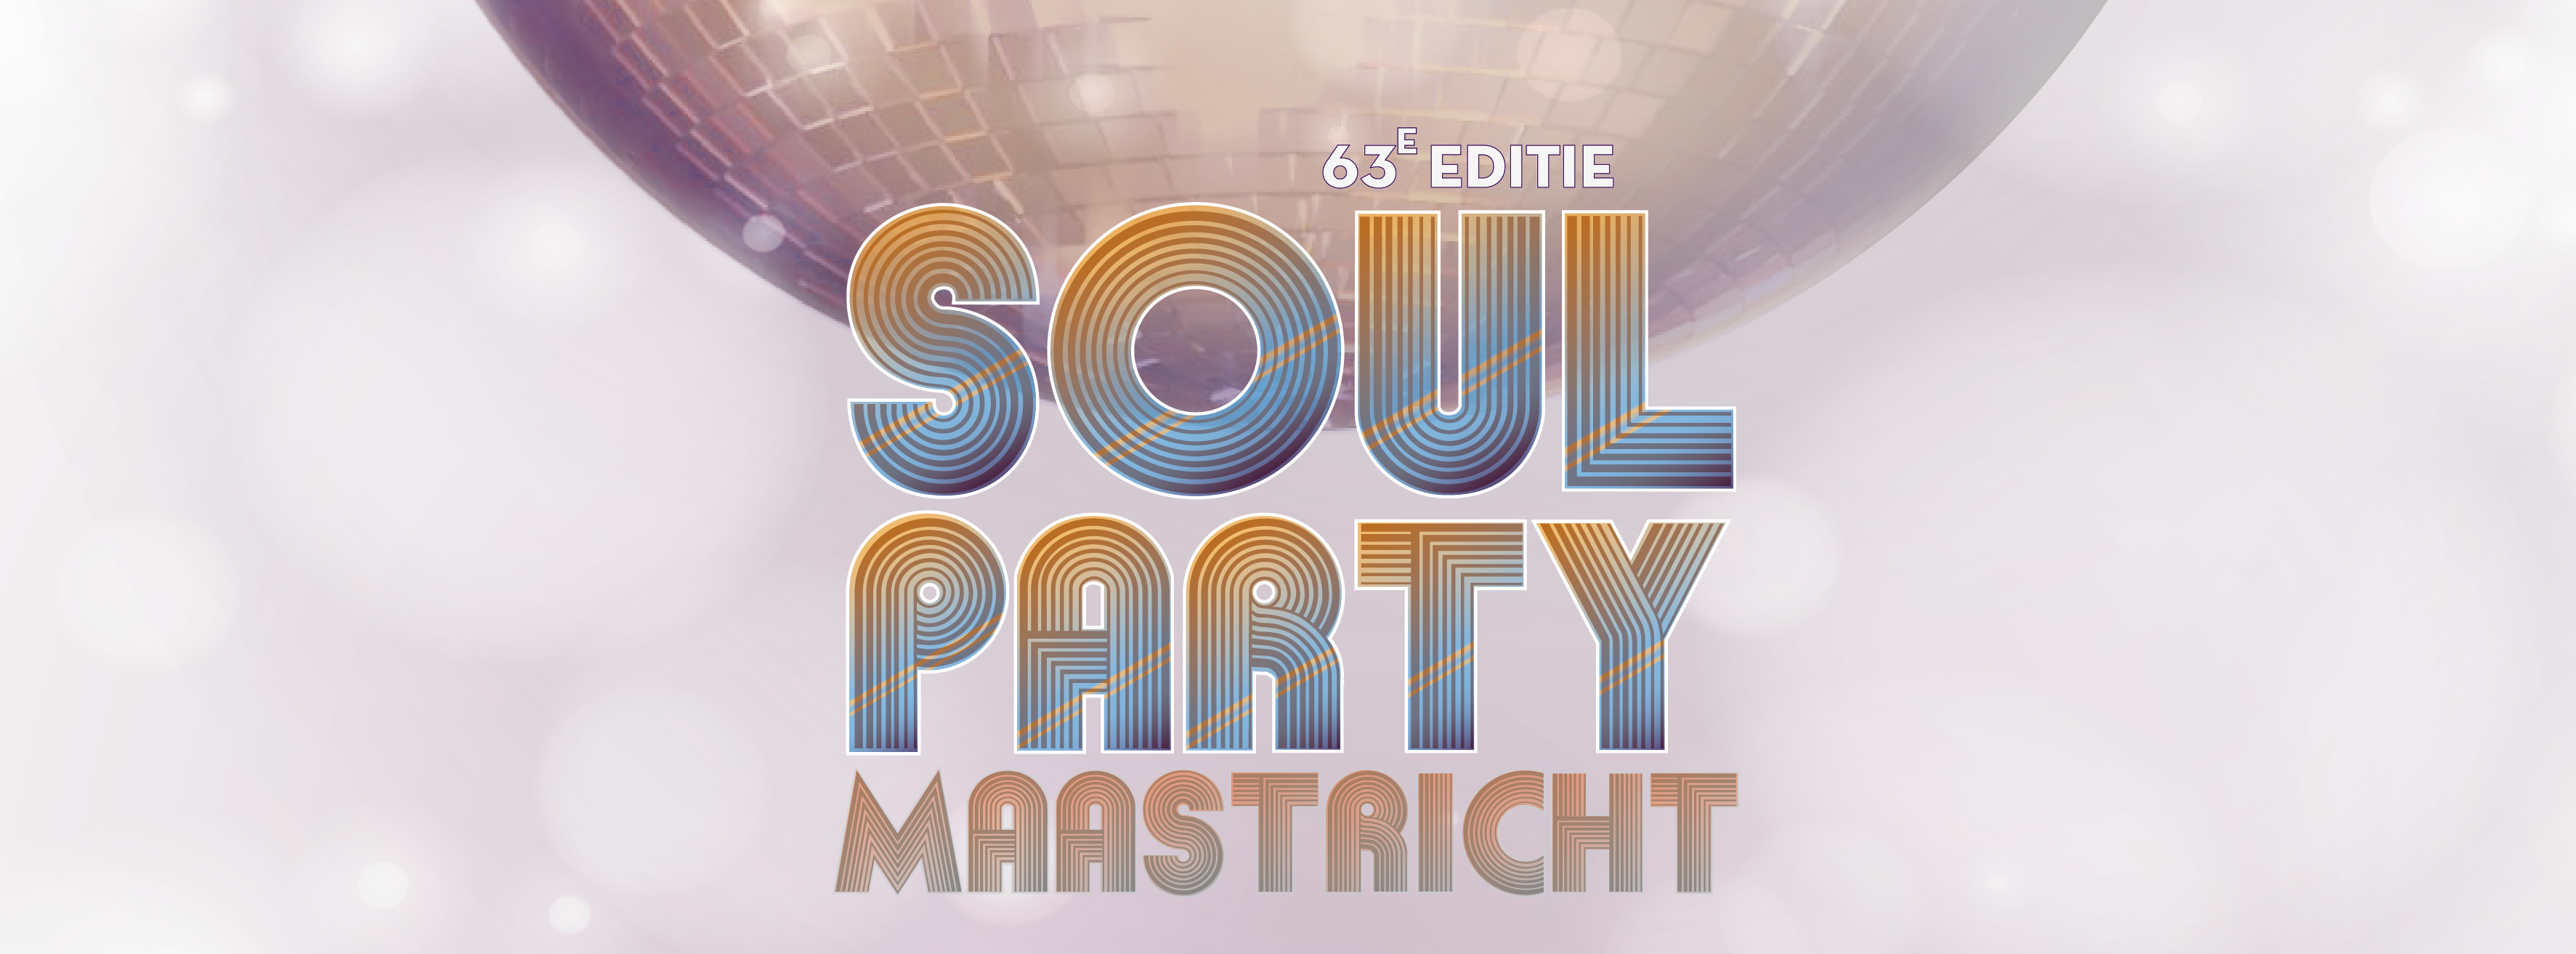 Soulparty 29 september 2018